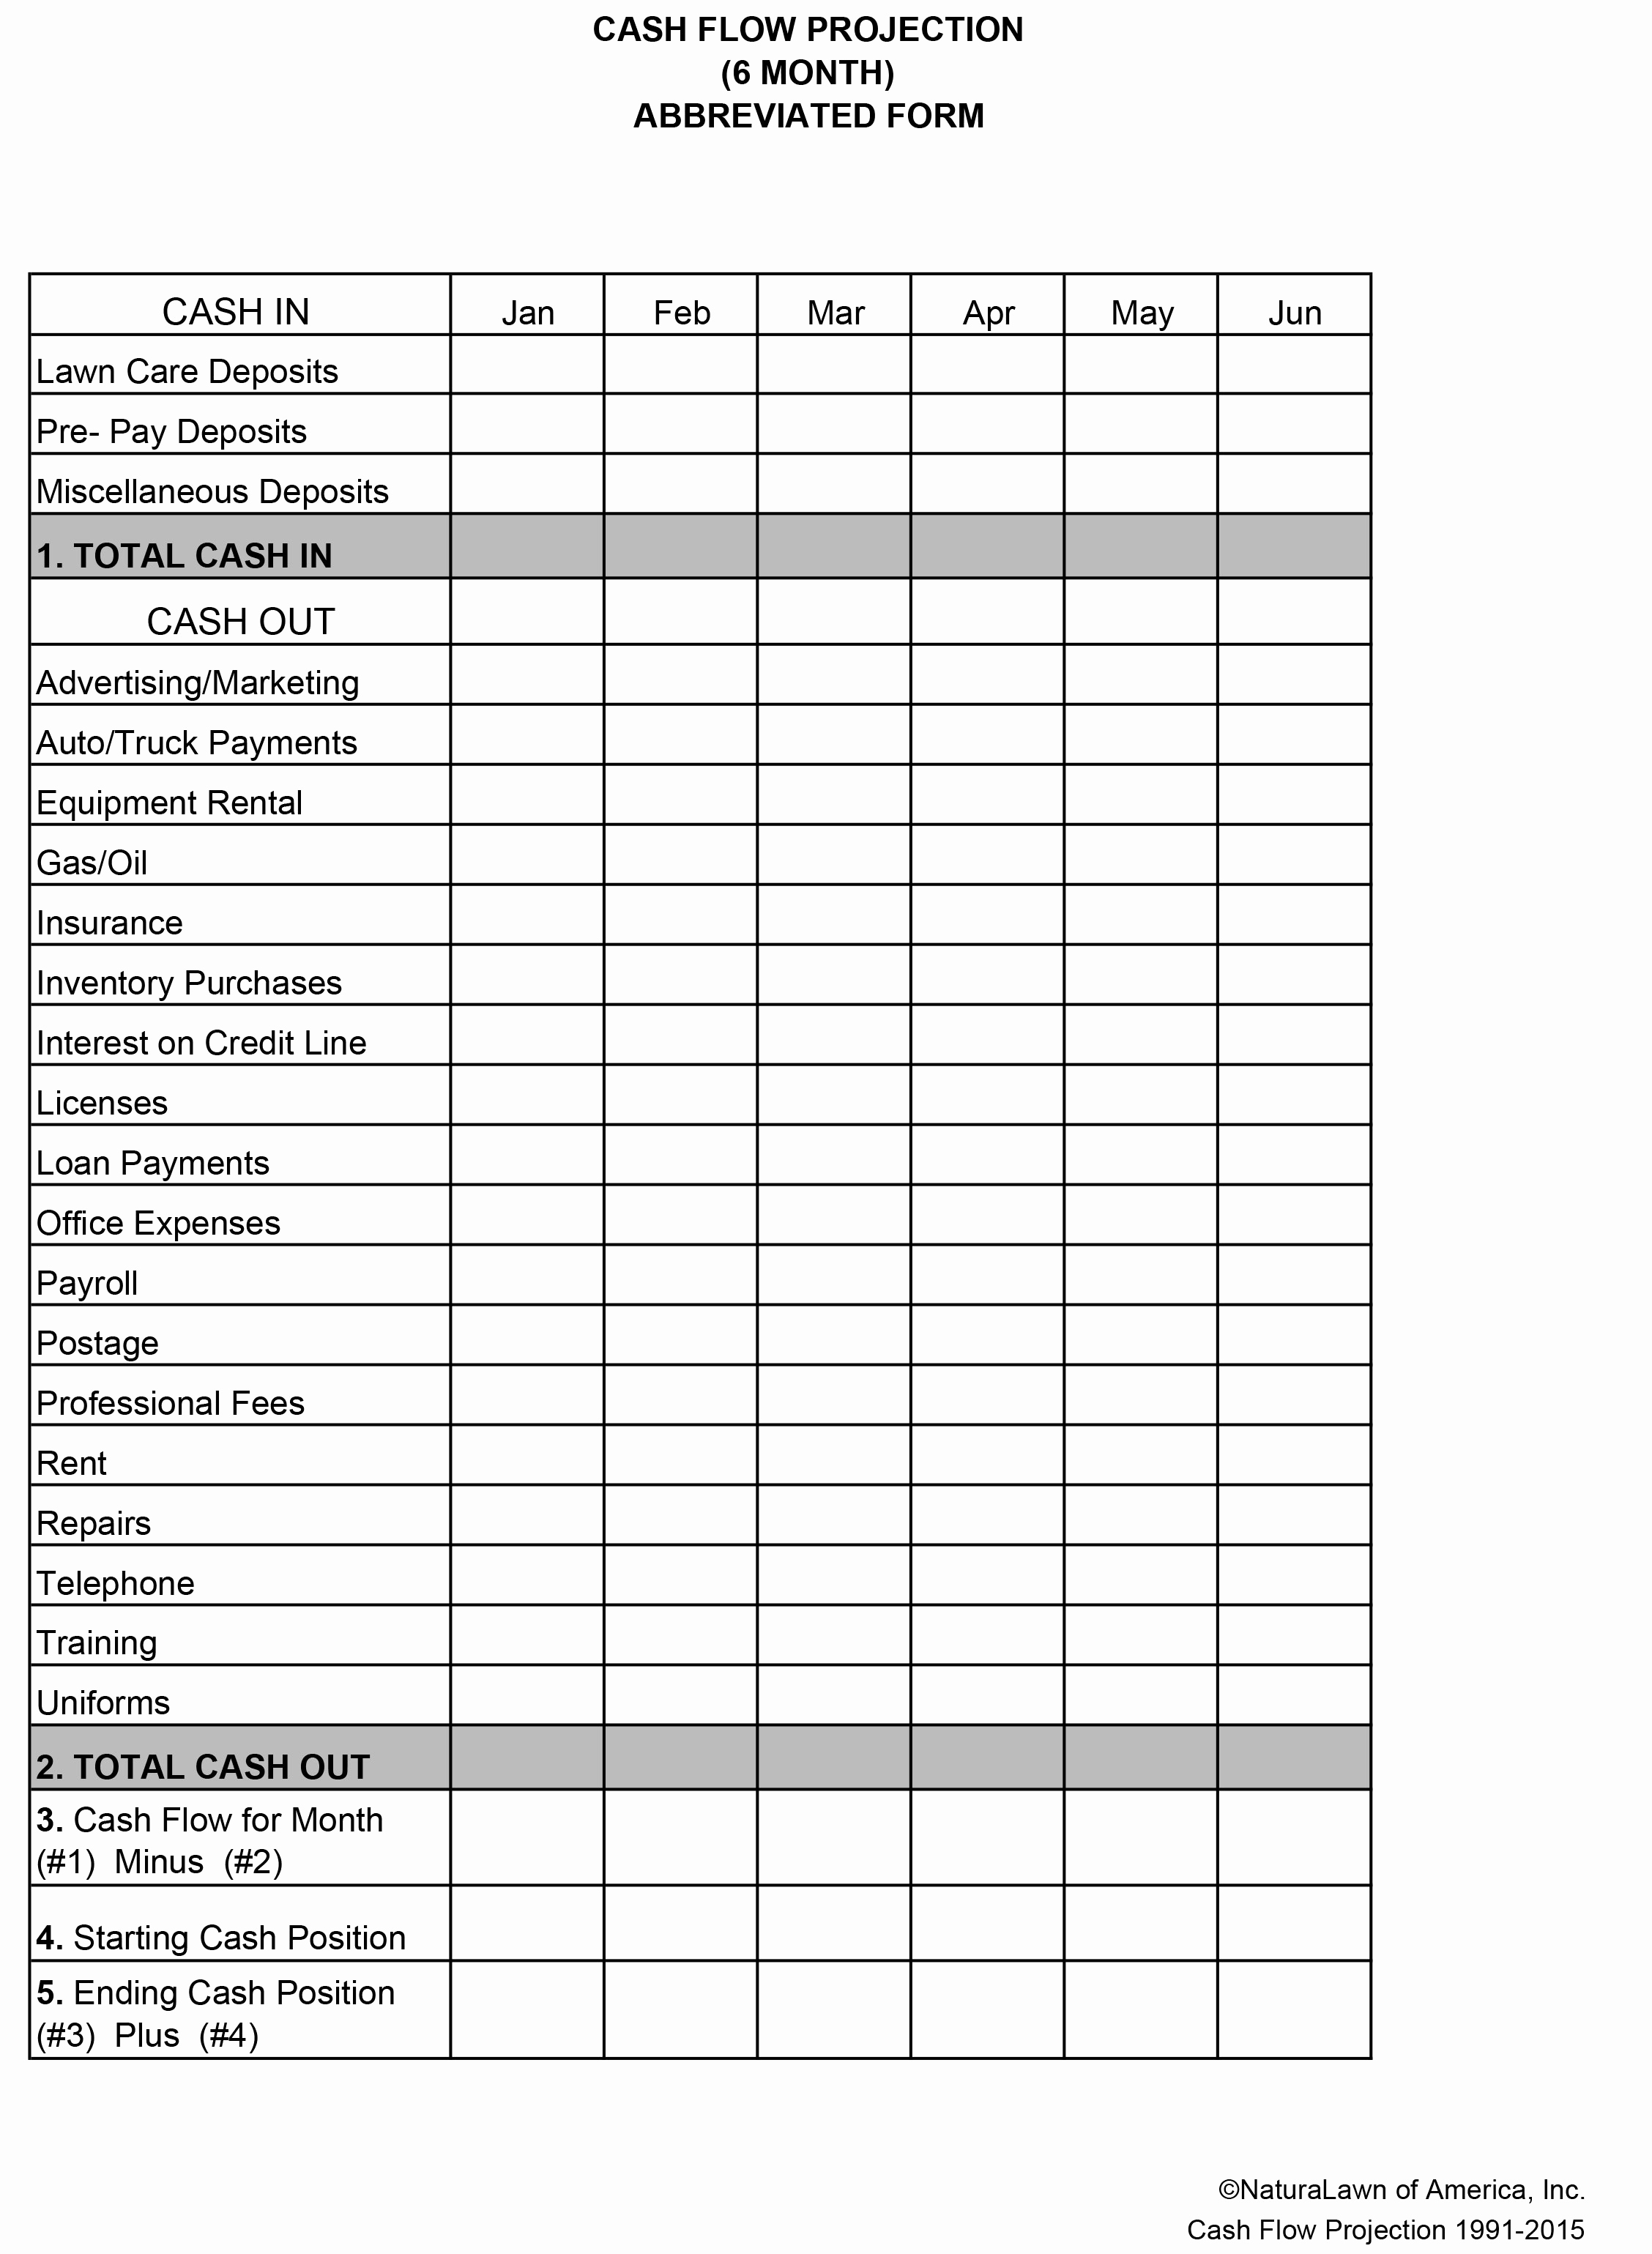 Business Valuation Spreadsheet Best Of Lawn Care Business Expenses Throughout Lawn Care Business Expenses Spreadsheet